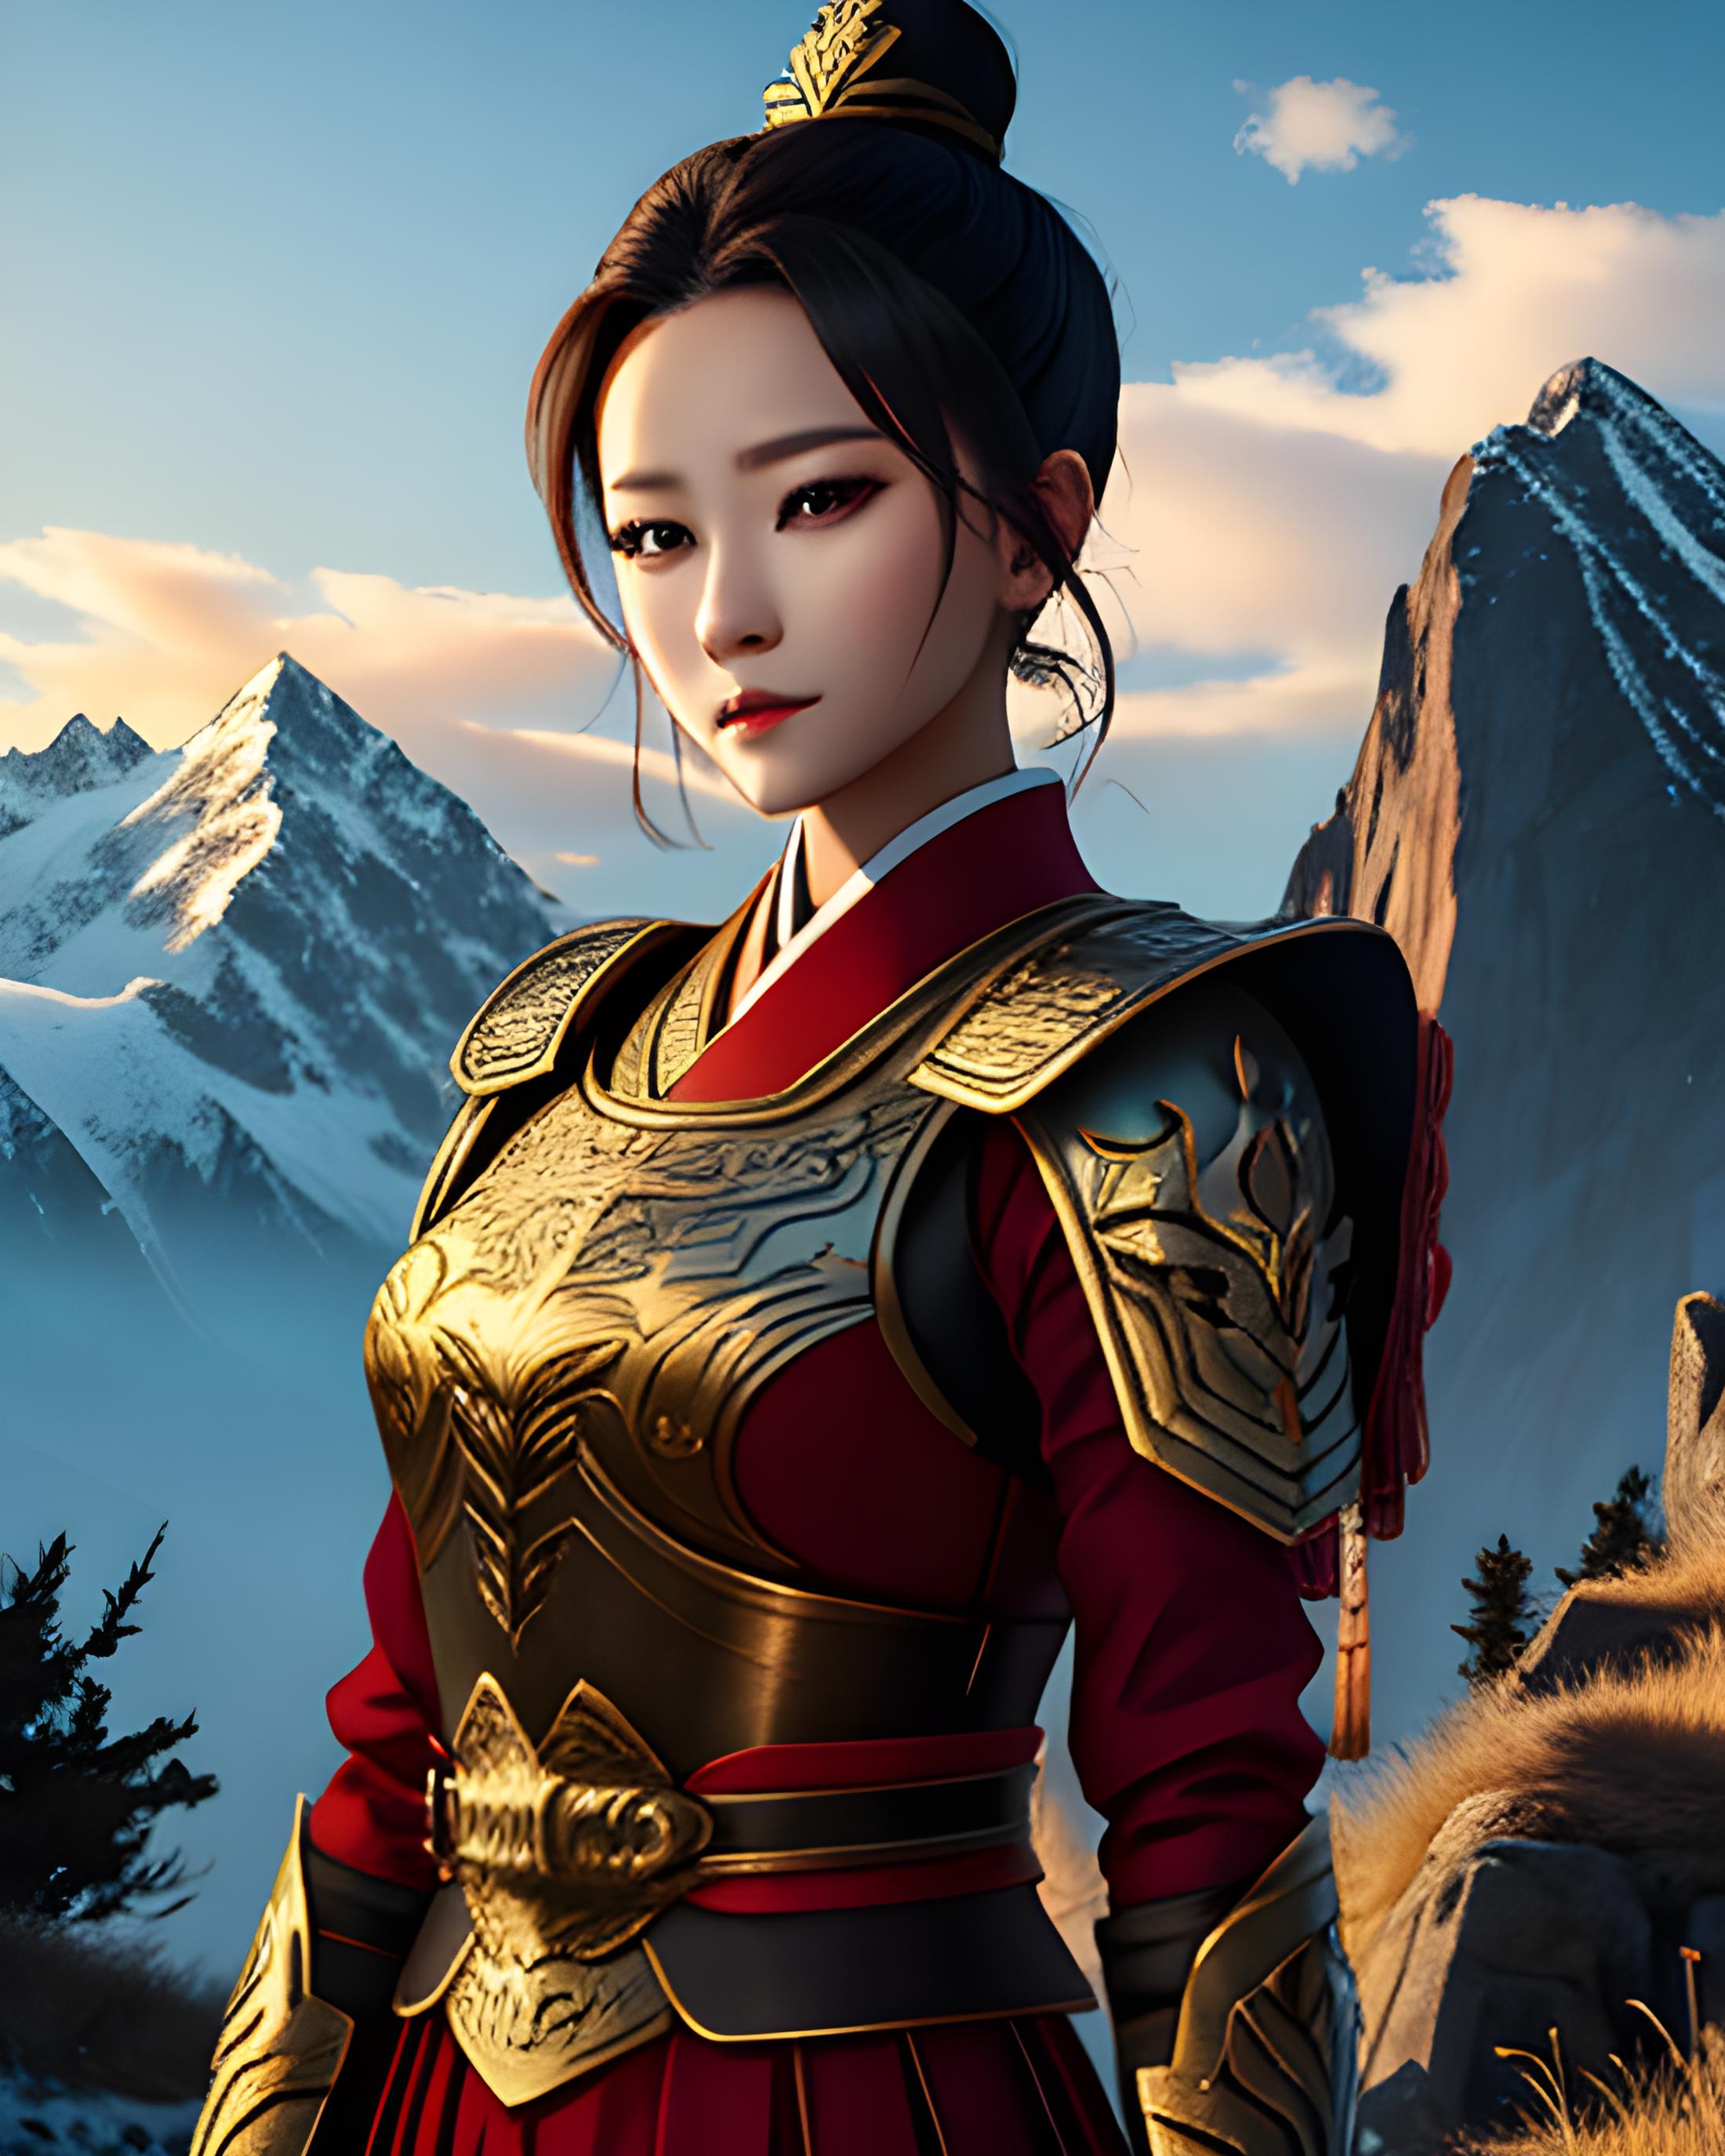 Chinese Female General - Battle Armor image by KimiKoro